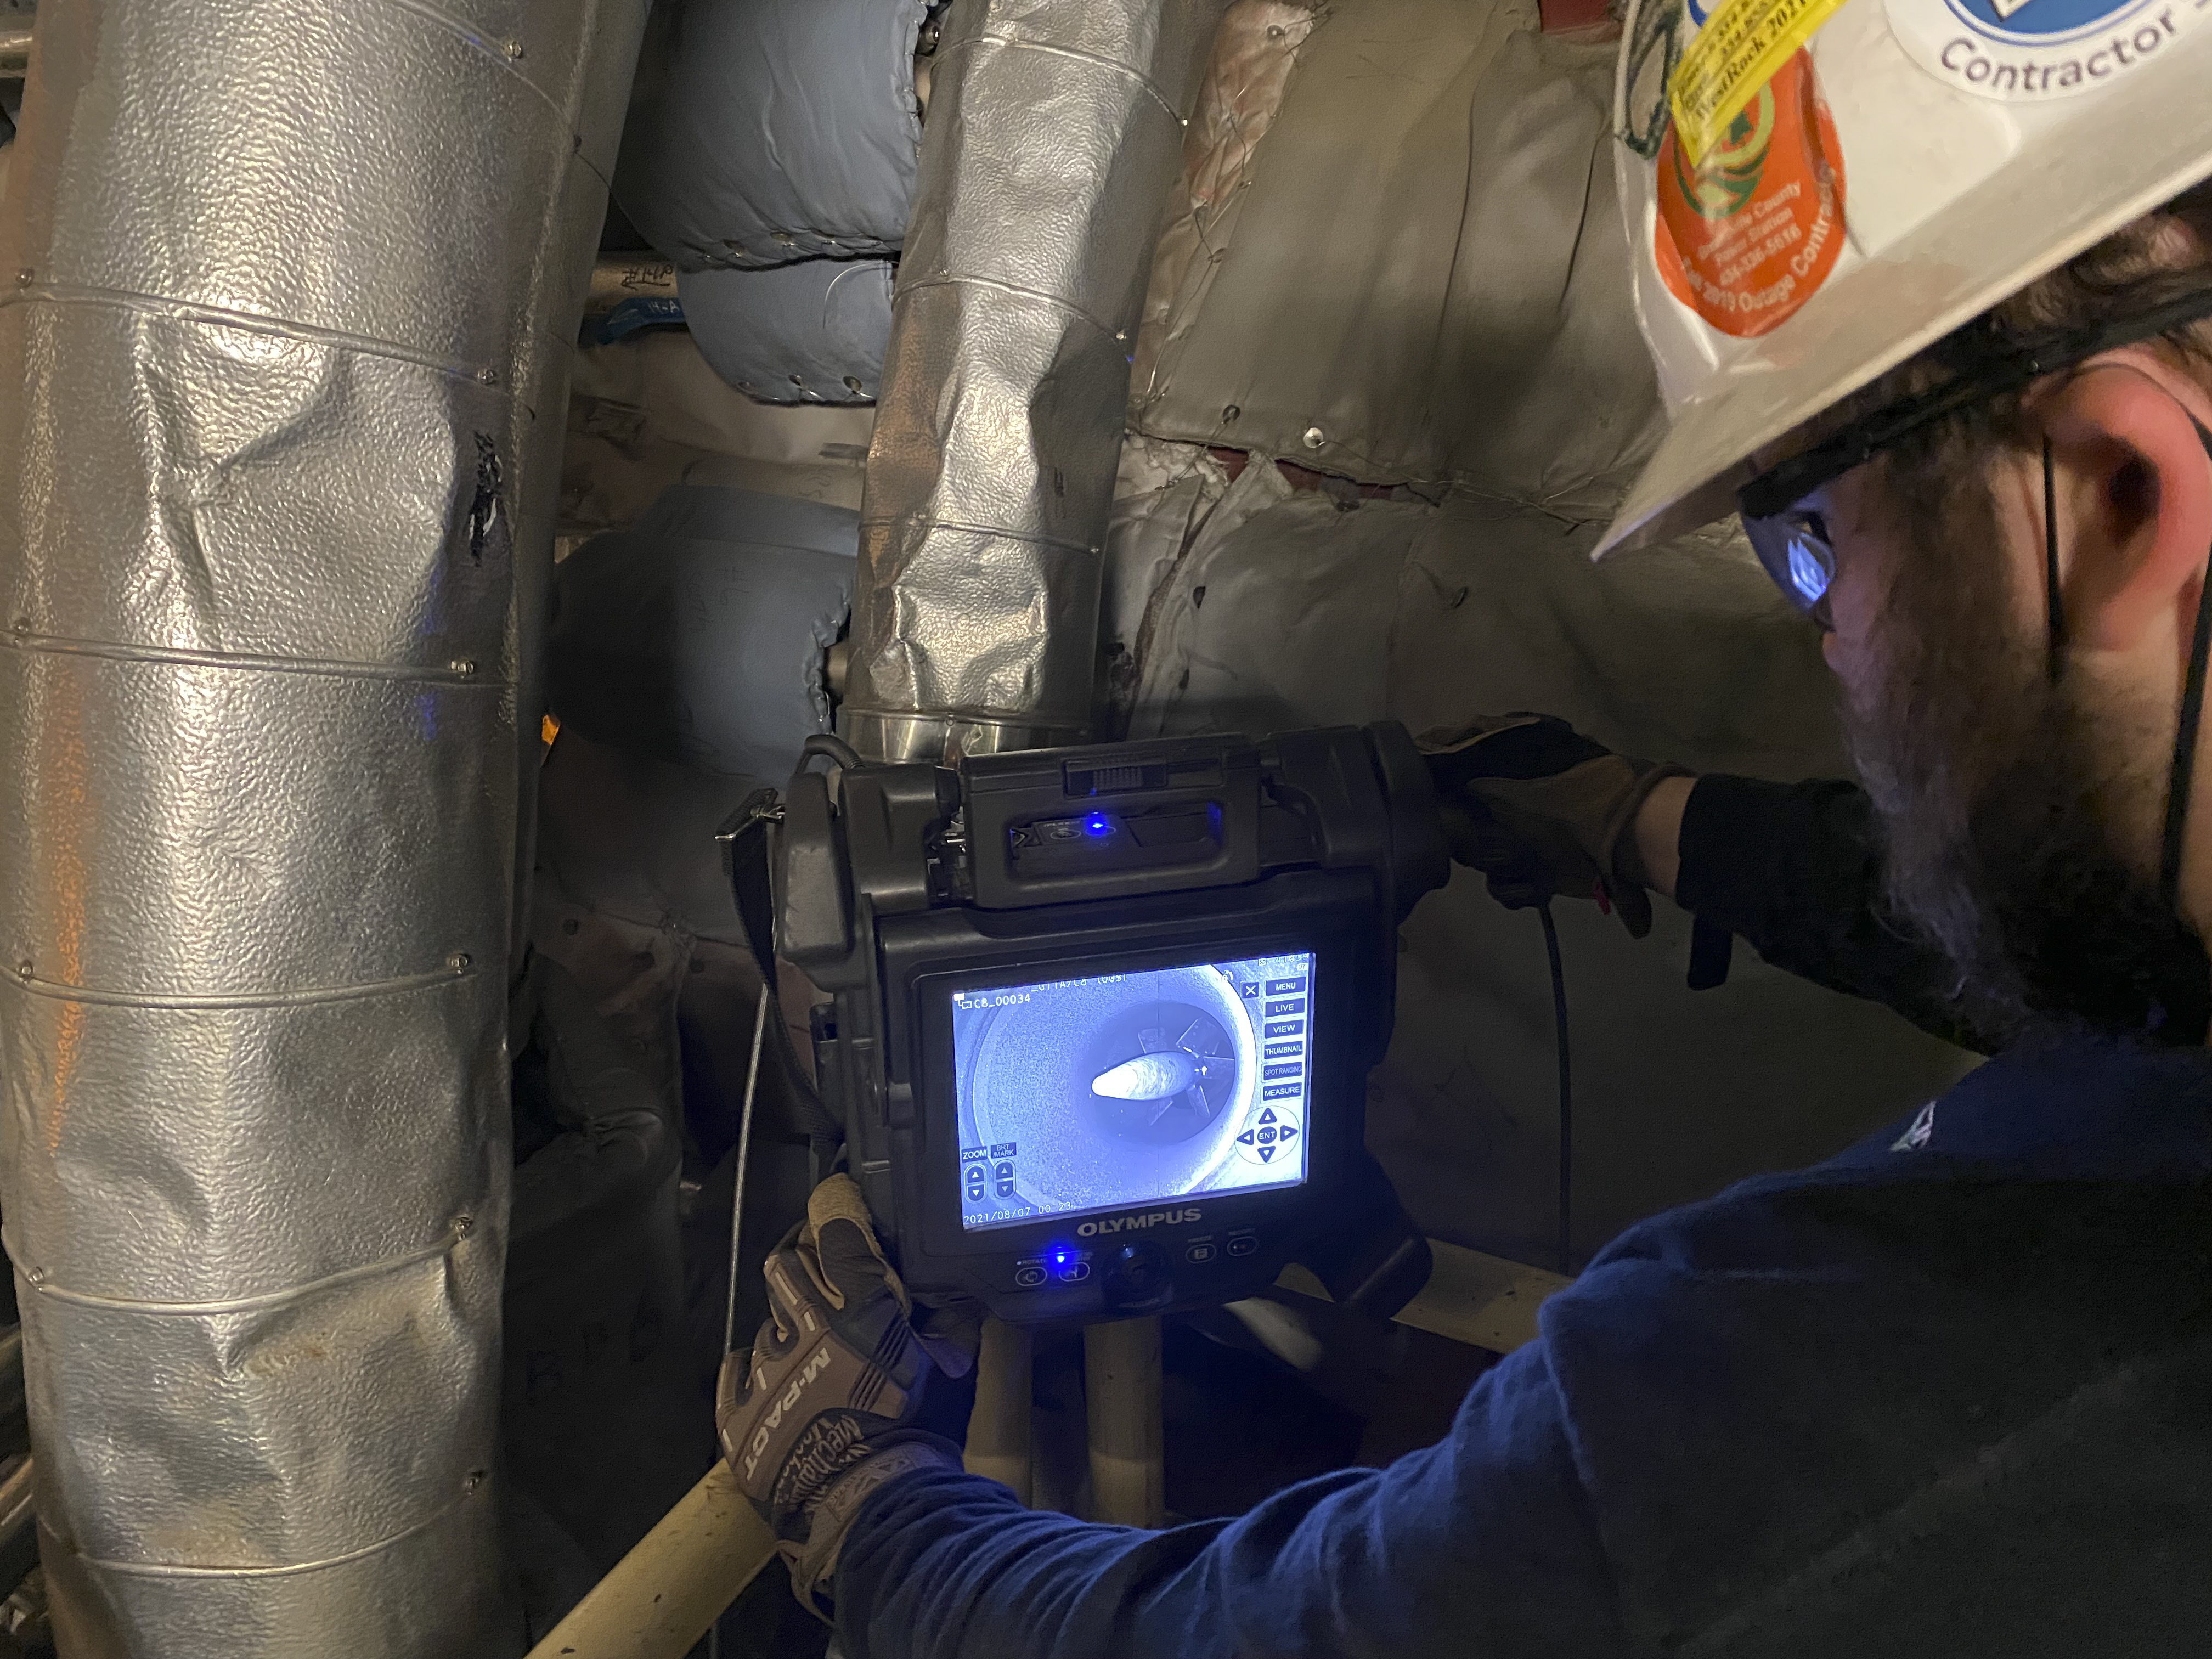 Veracity Technology Solutions inspector using the IPLEX NX videoscope to conduct a borescopic inspection of a gas turbine in a power generation plant